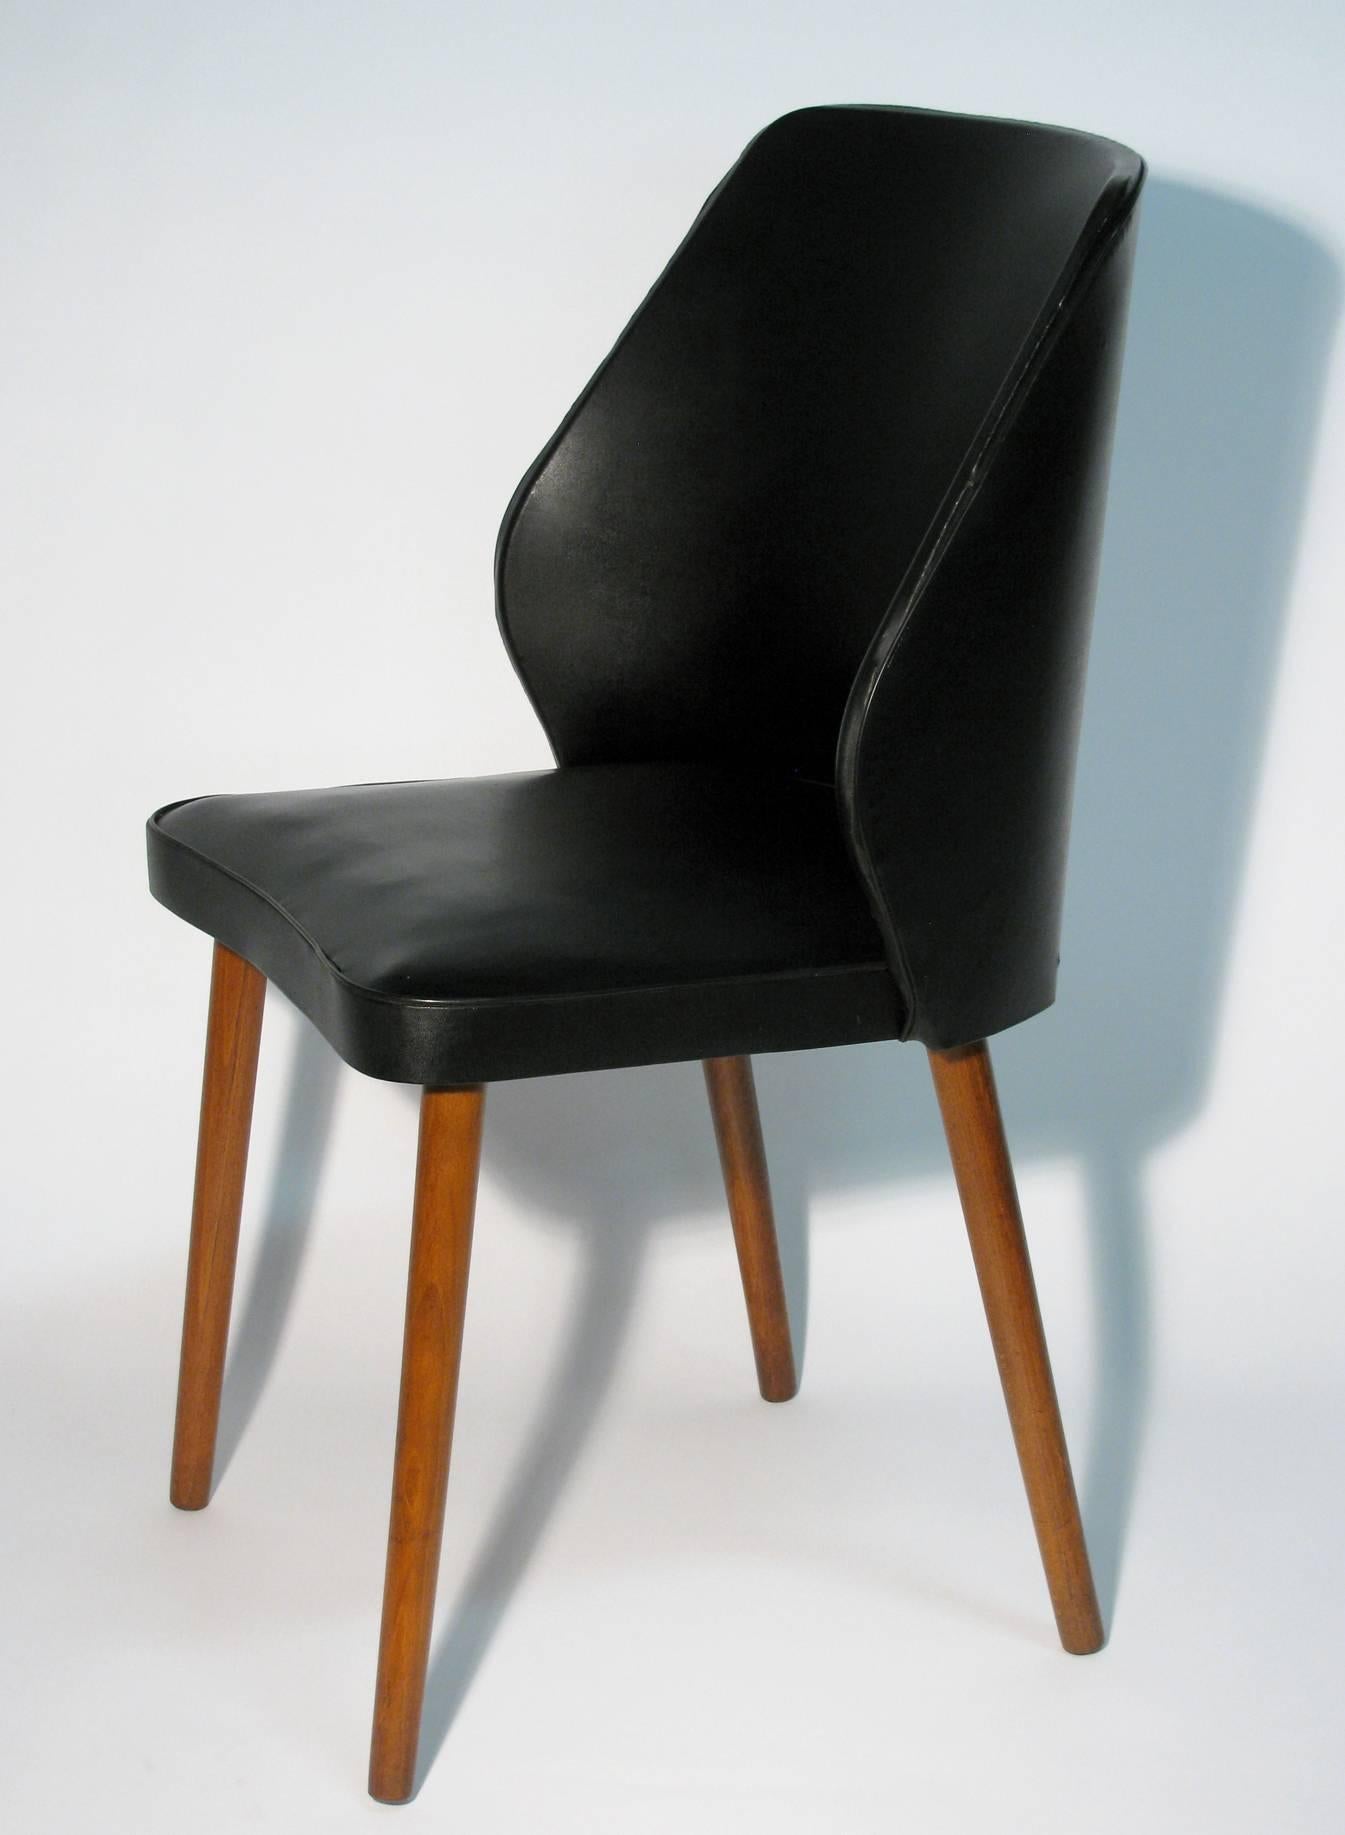 Danish modern occasional chair of black pebble grain faux leather, with a curved back, serpentine-front seat, on tapered teak legs.